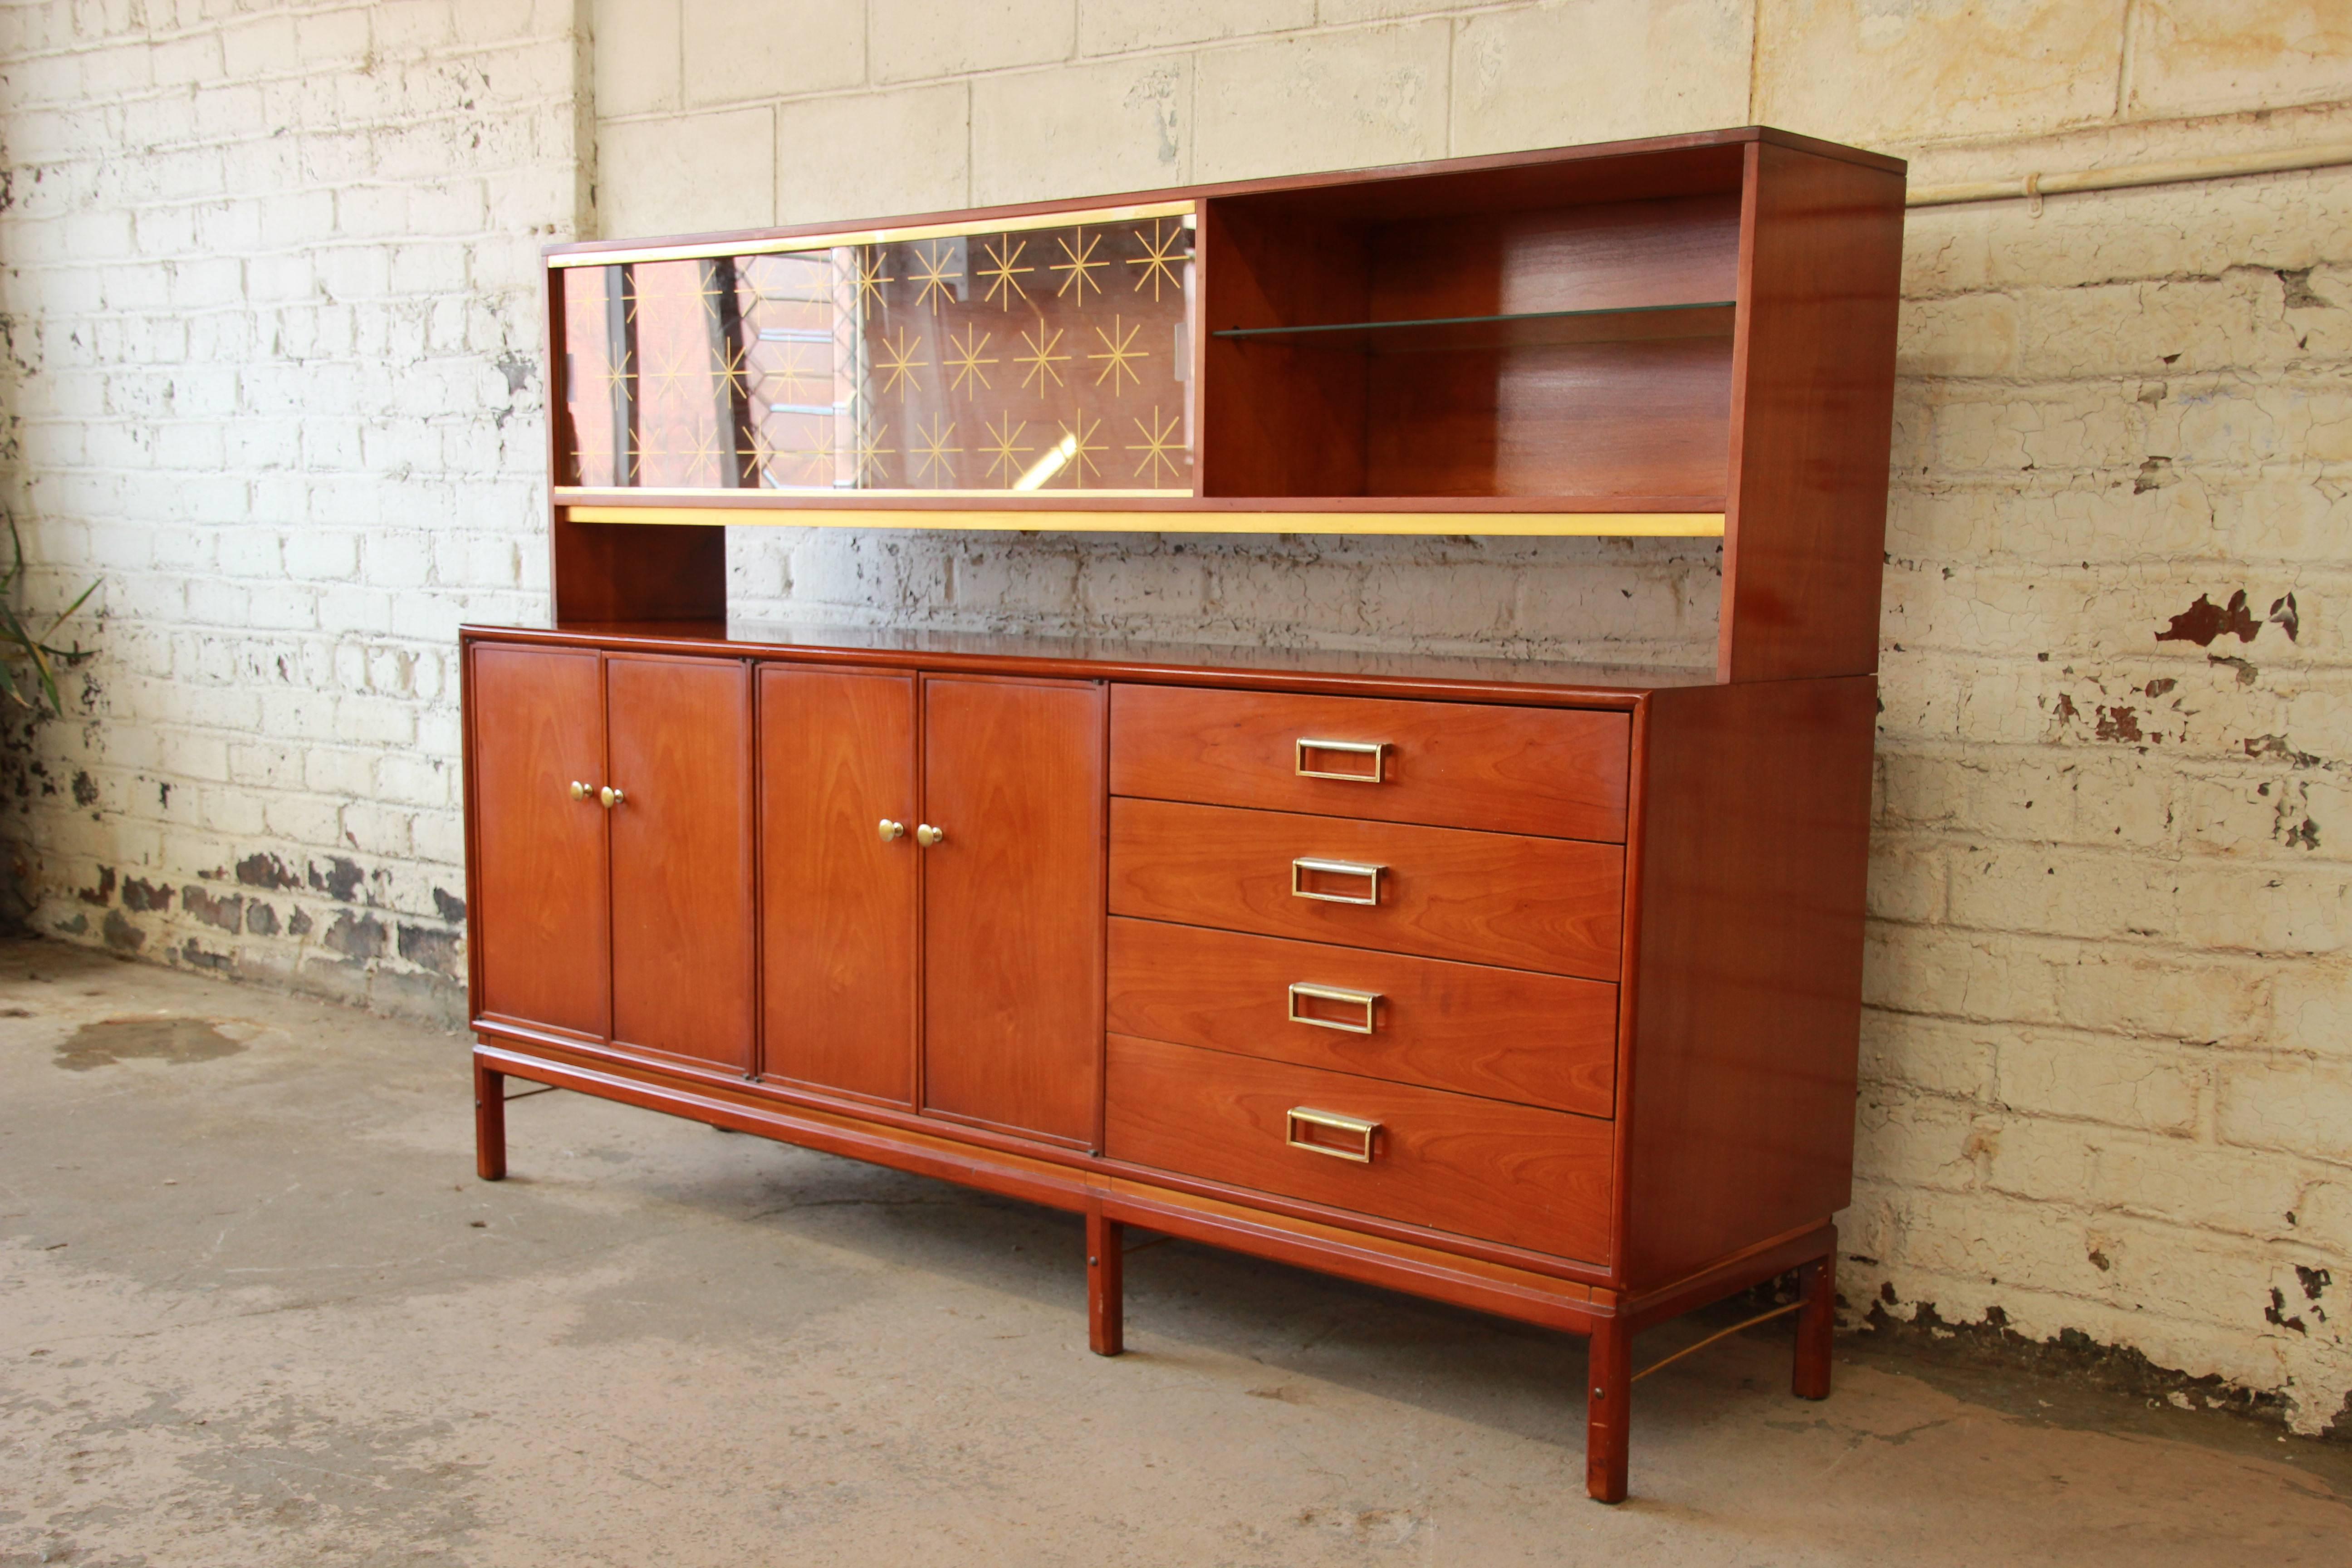 A rare and exceptional Mid-Century Modern credenza with hutch designed by Kipp Stewart for Drexel's 